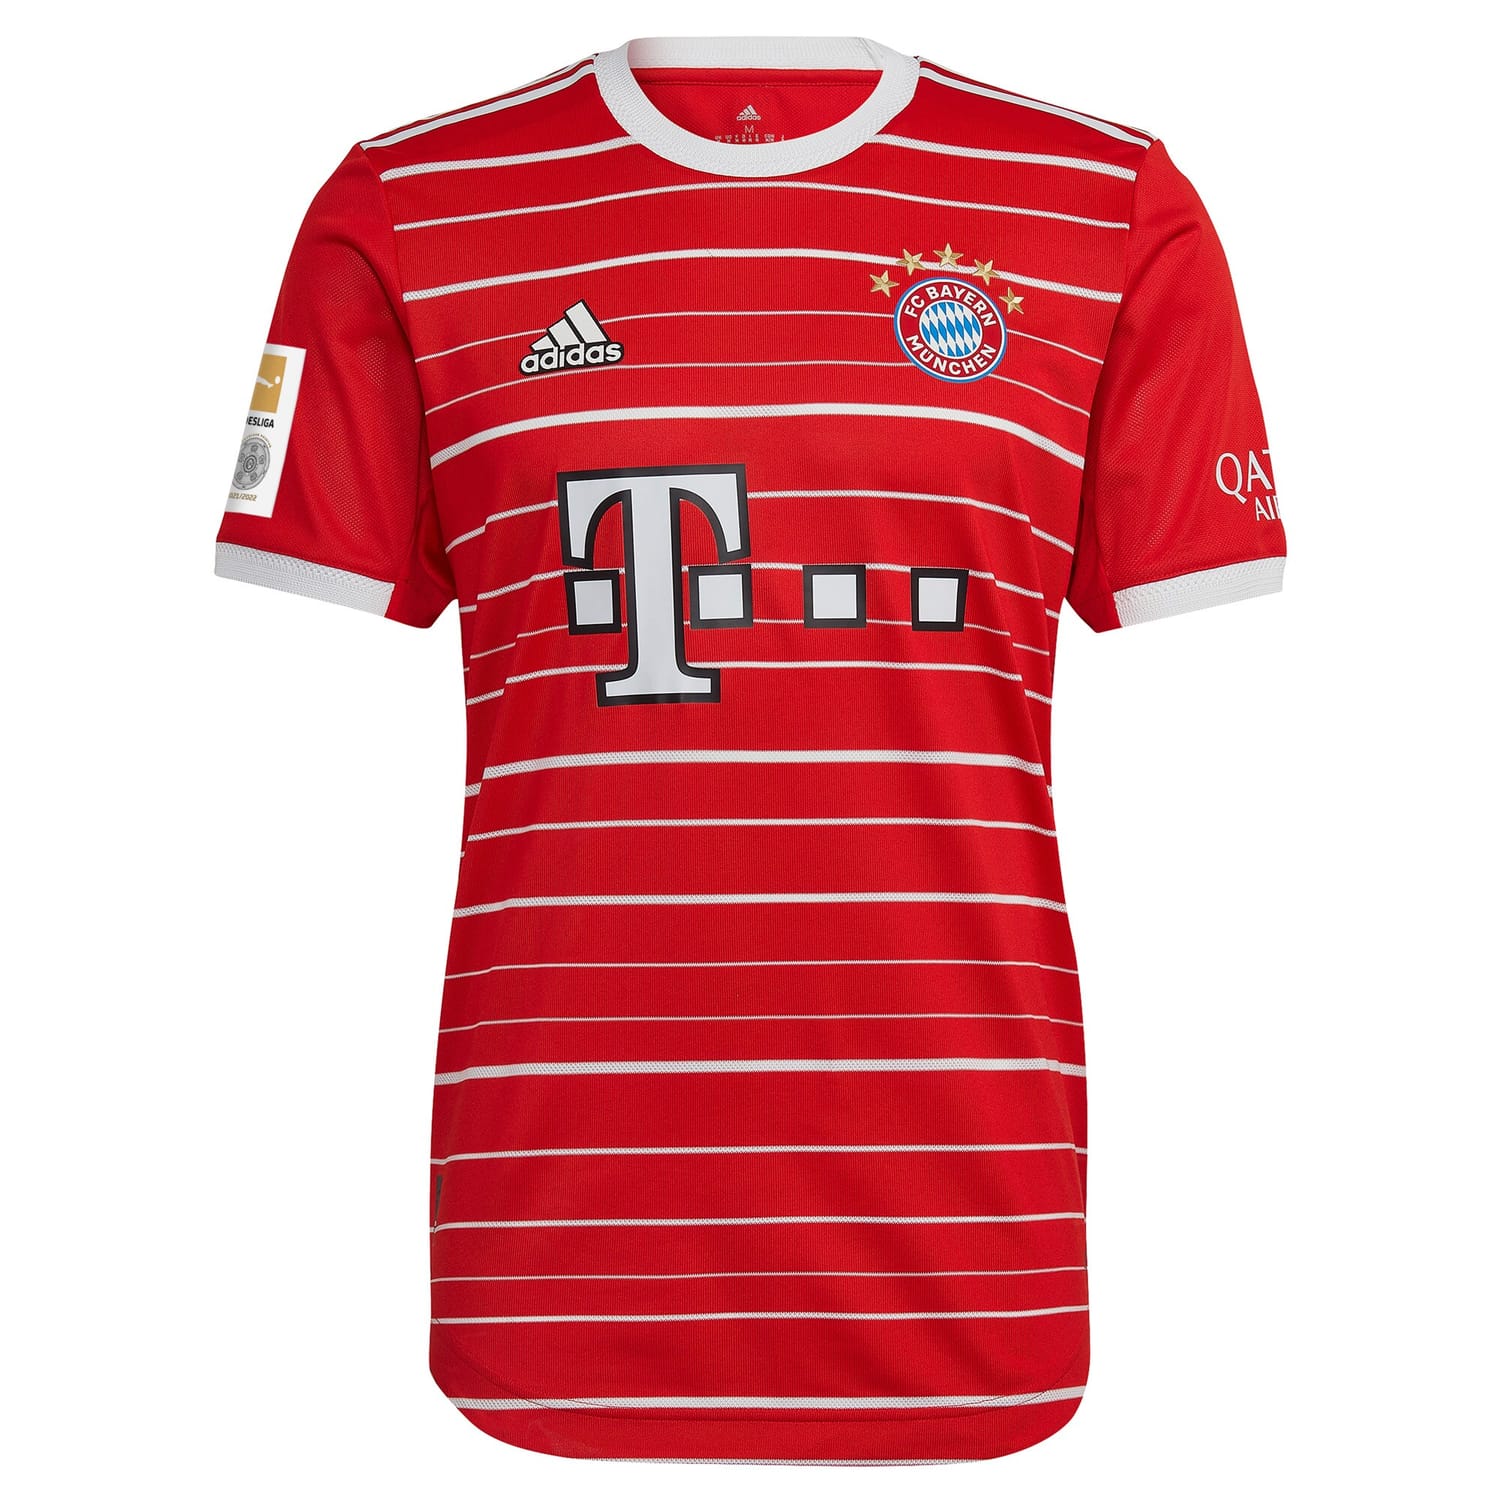 Bundesliga Bayern Munich Home Authentic Jersey Shirt Red 2022-23 player Kingsley Coman printing for Men